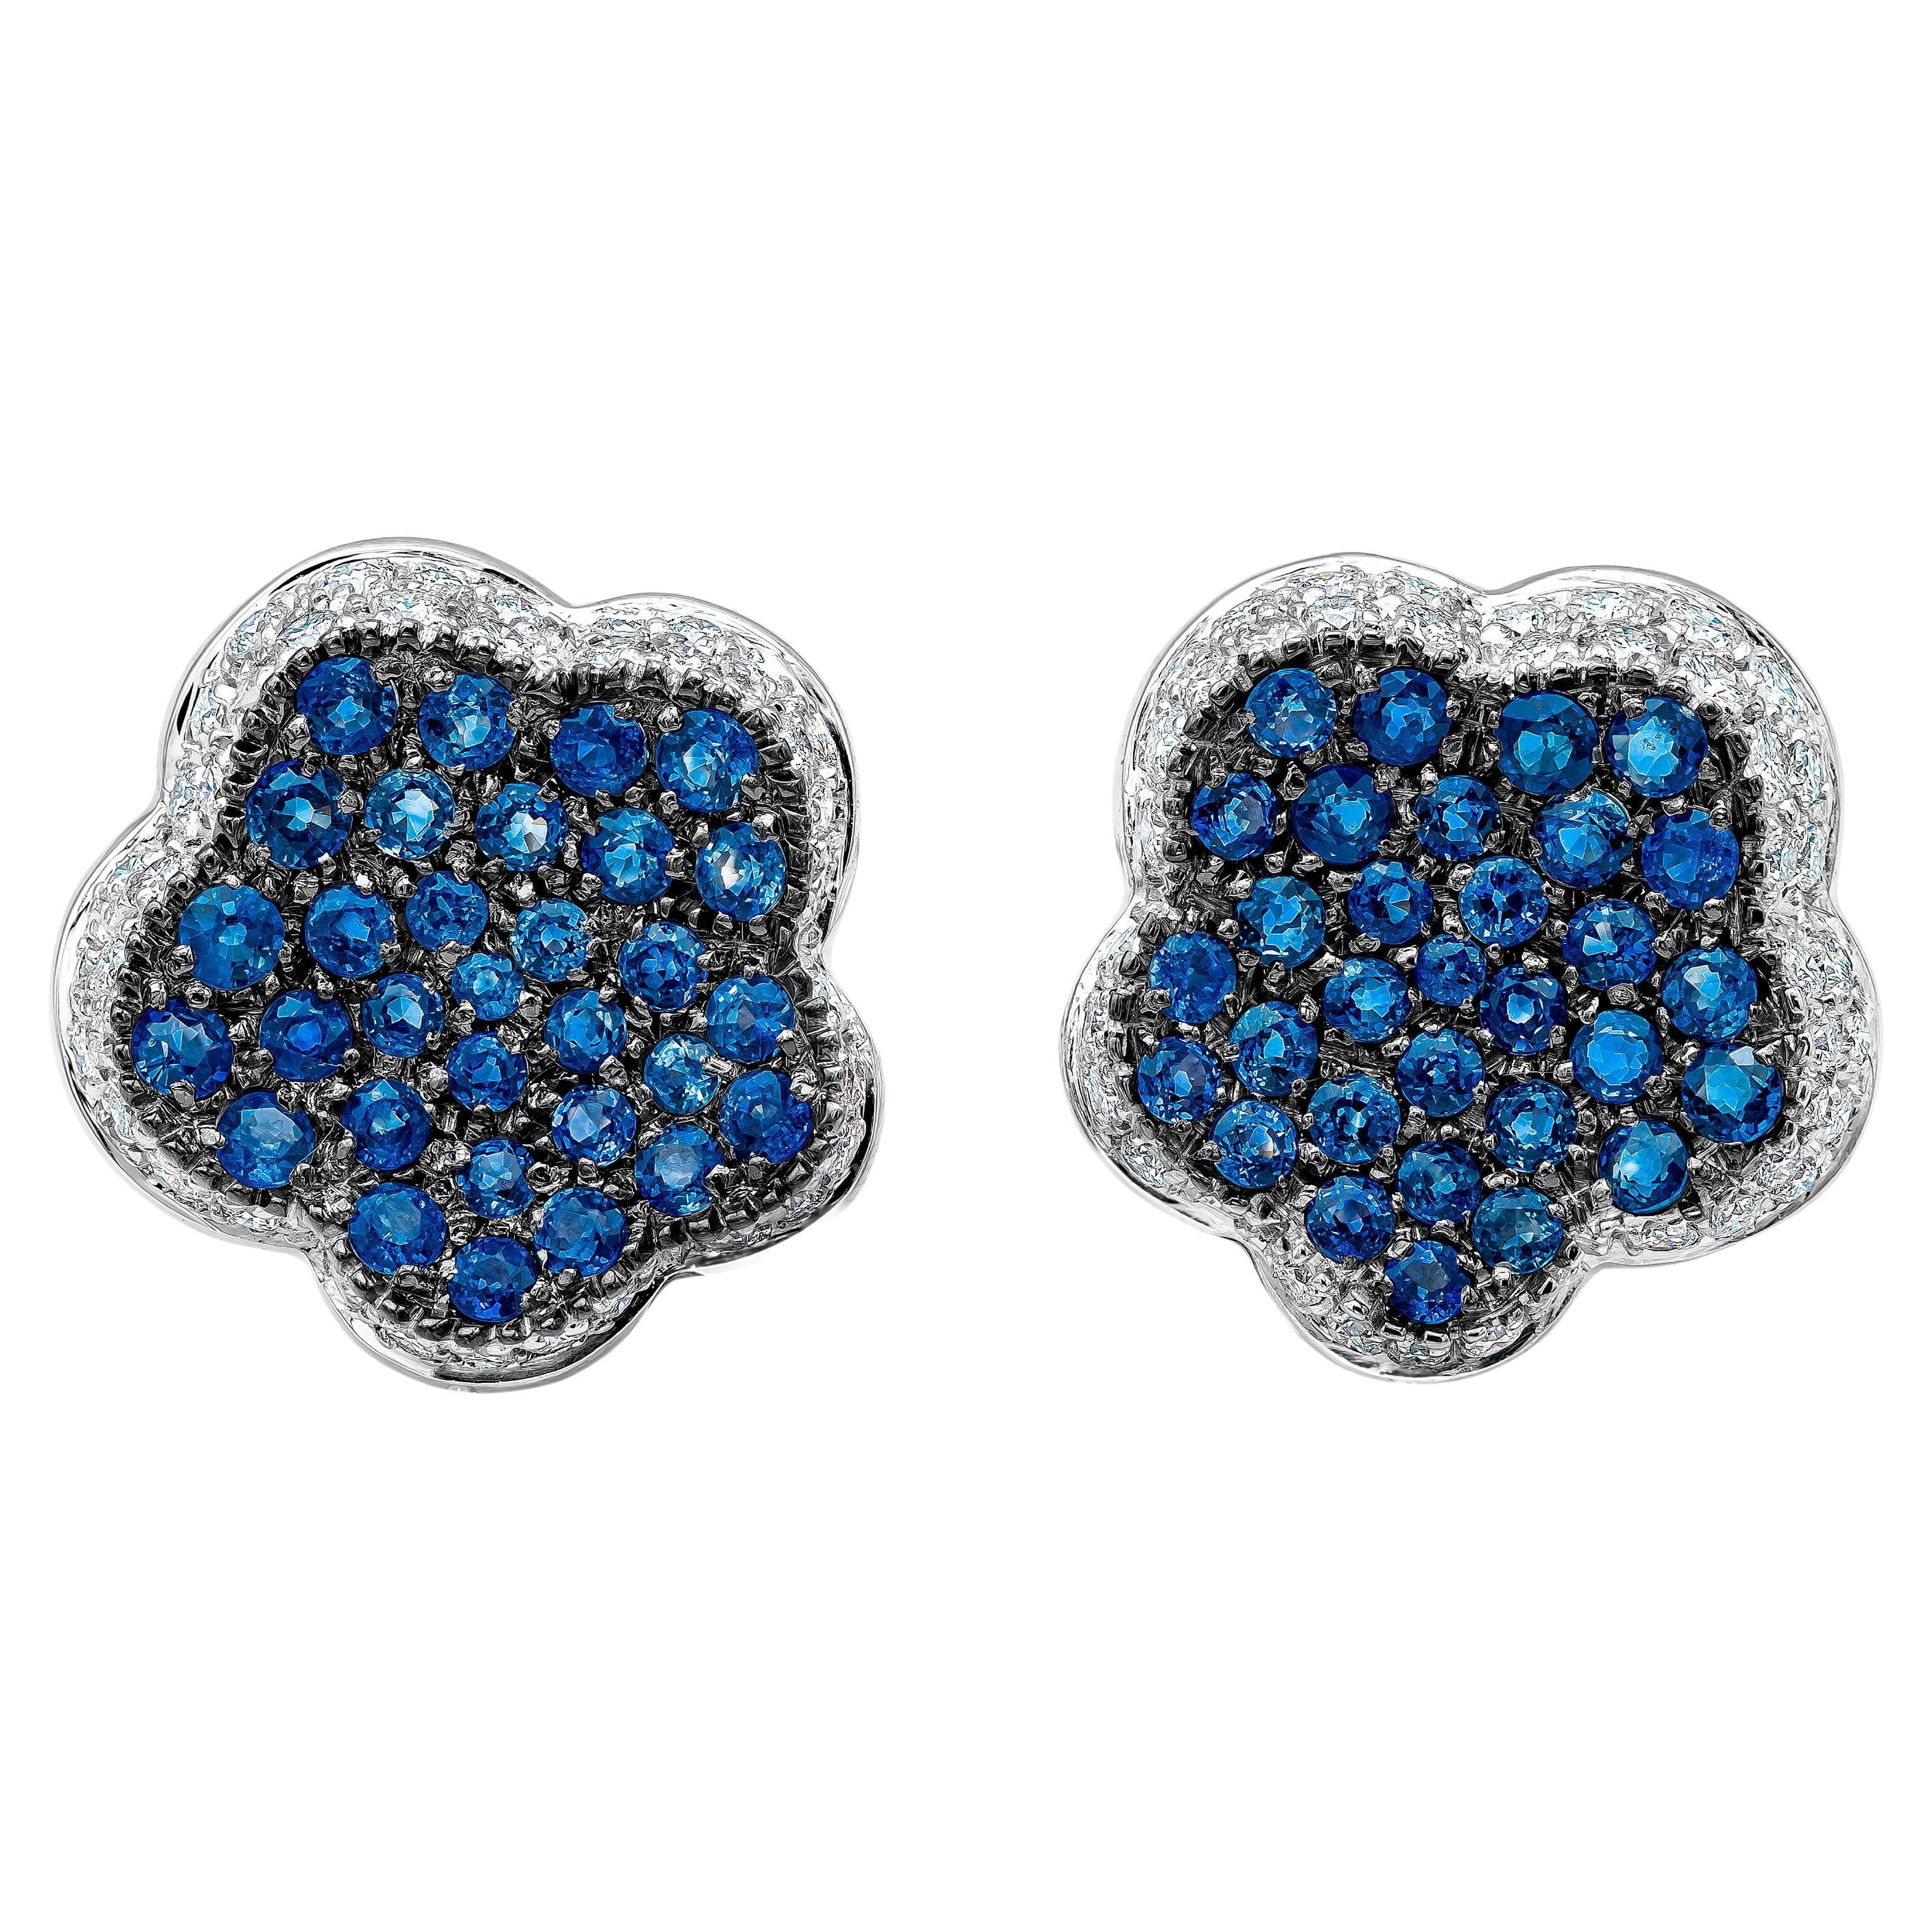 4.35 Carats Total Micro-Pave Set Blue Sapphire and Diamond Flower Earrings For Sale